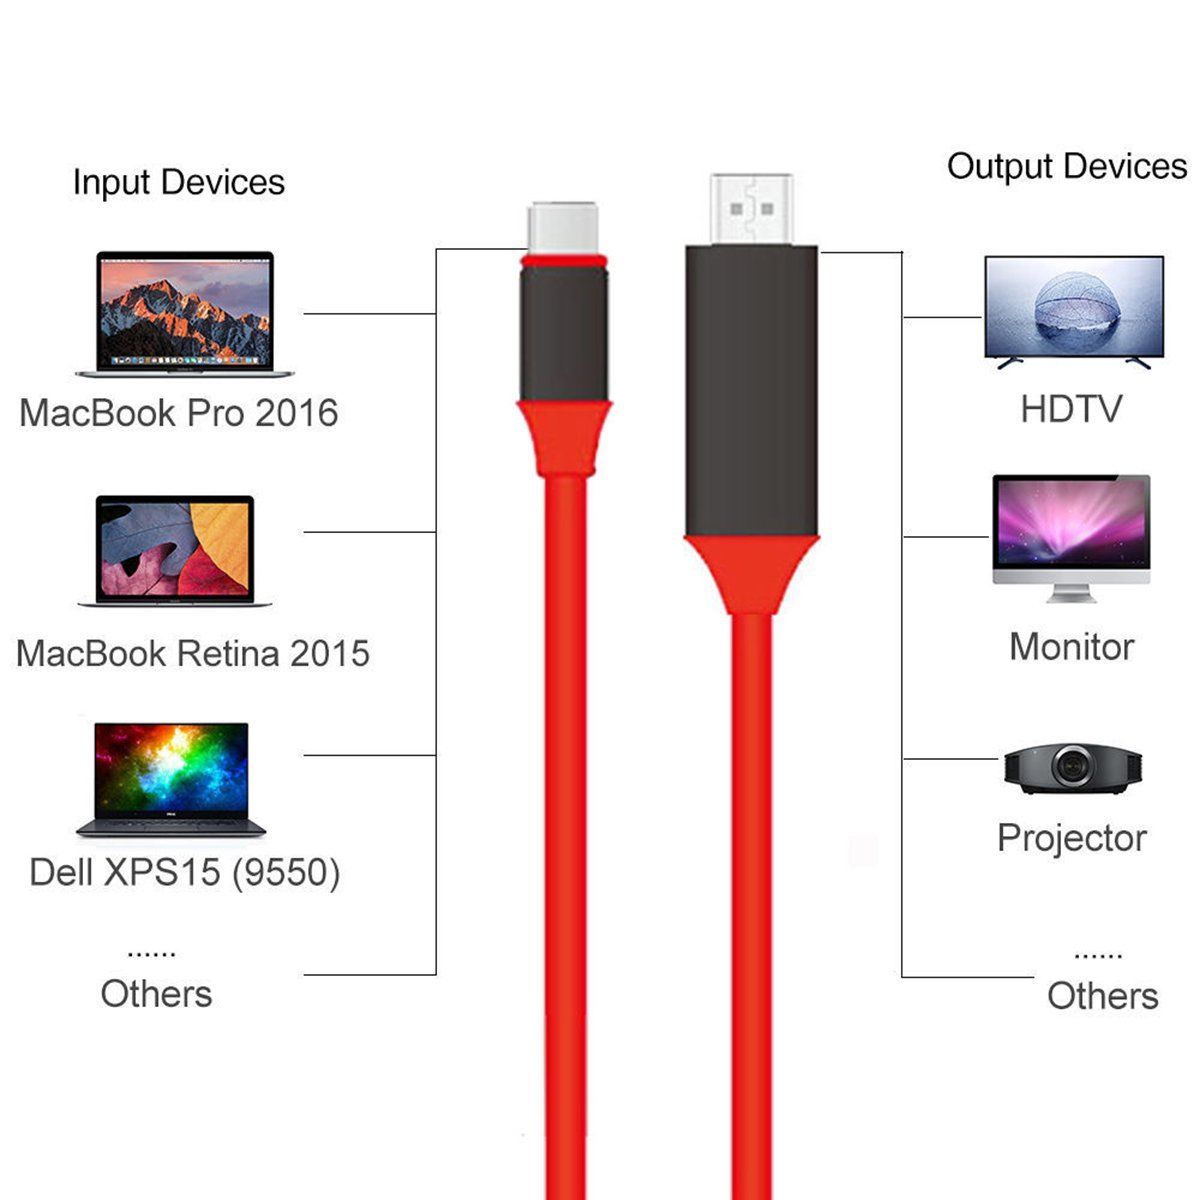 Type C USB 3.1 USB-C to HDMI HDTV Cable Adapter for Samsung S8/S8 Plus Macbook - Red